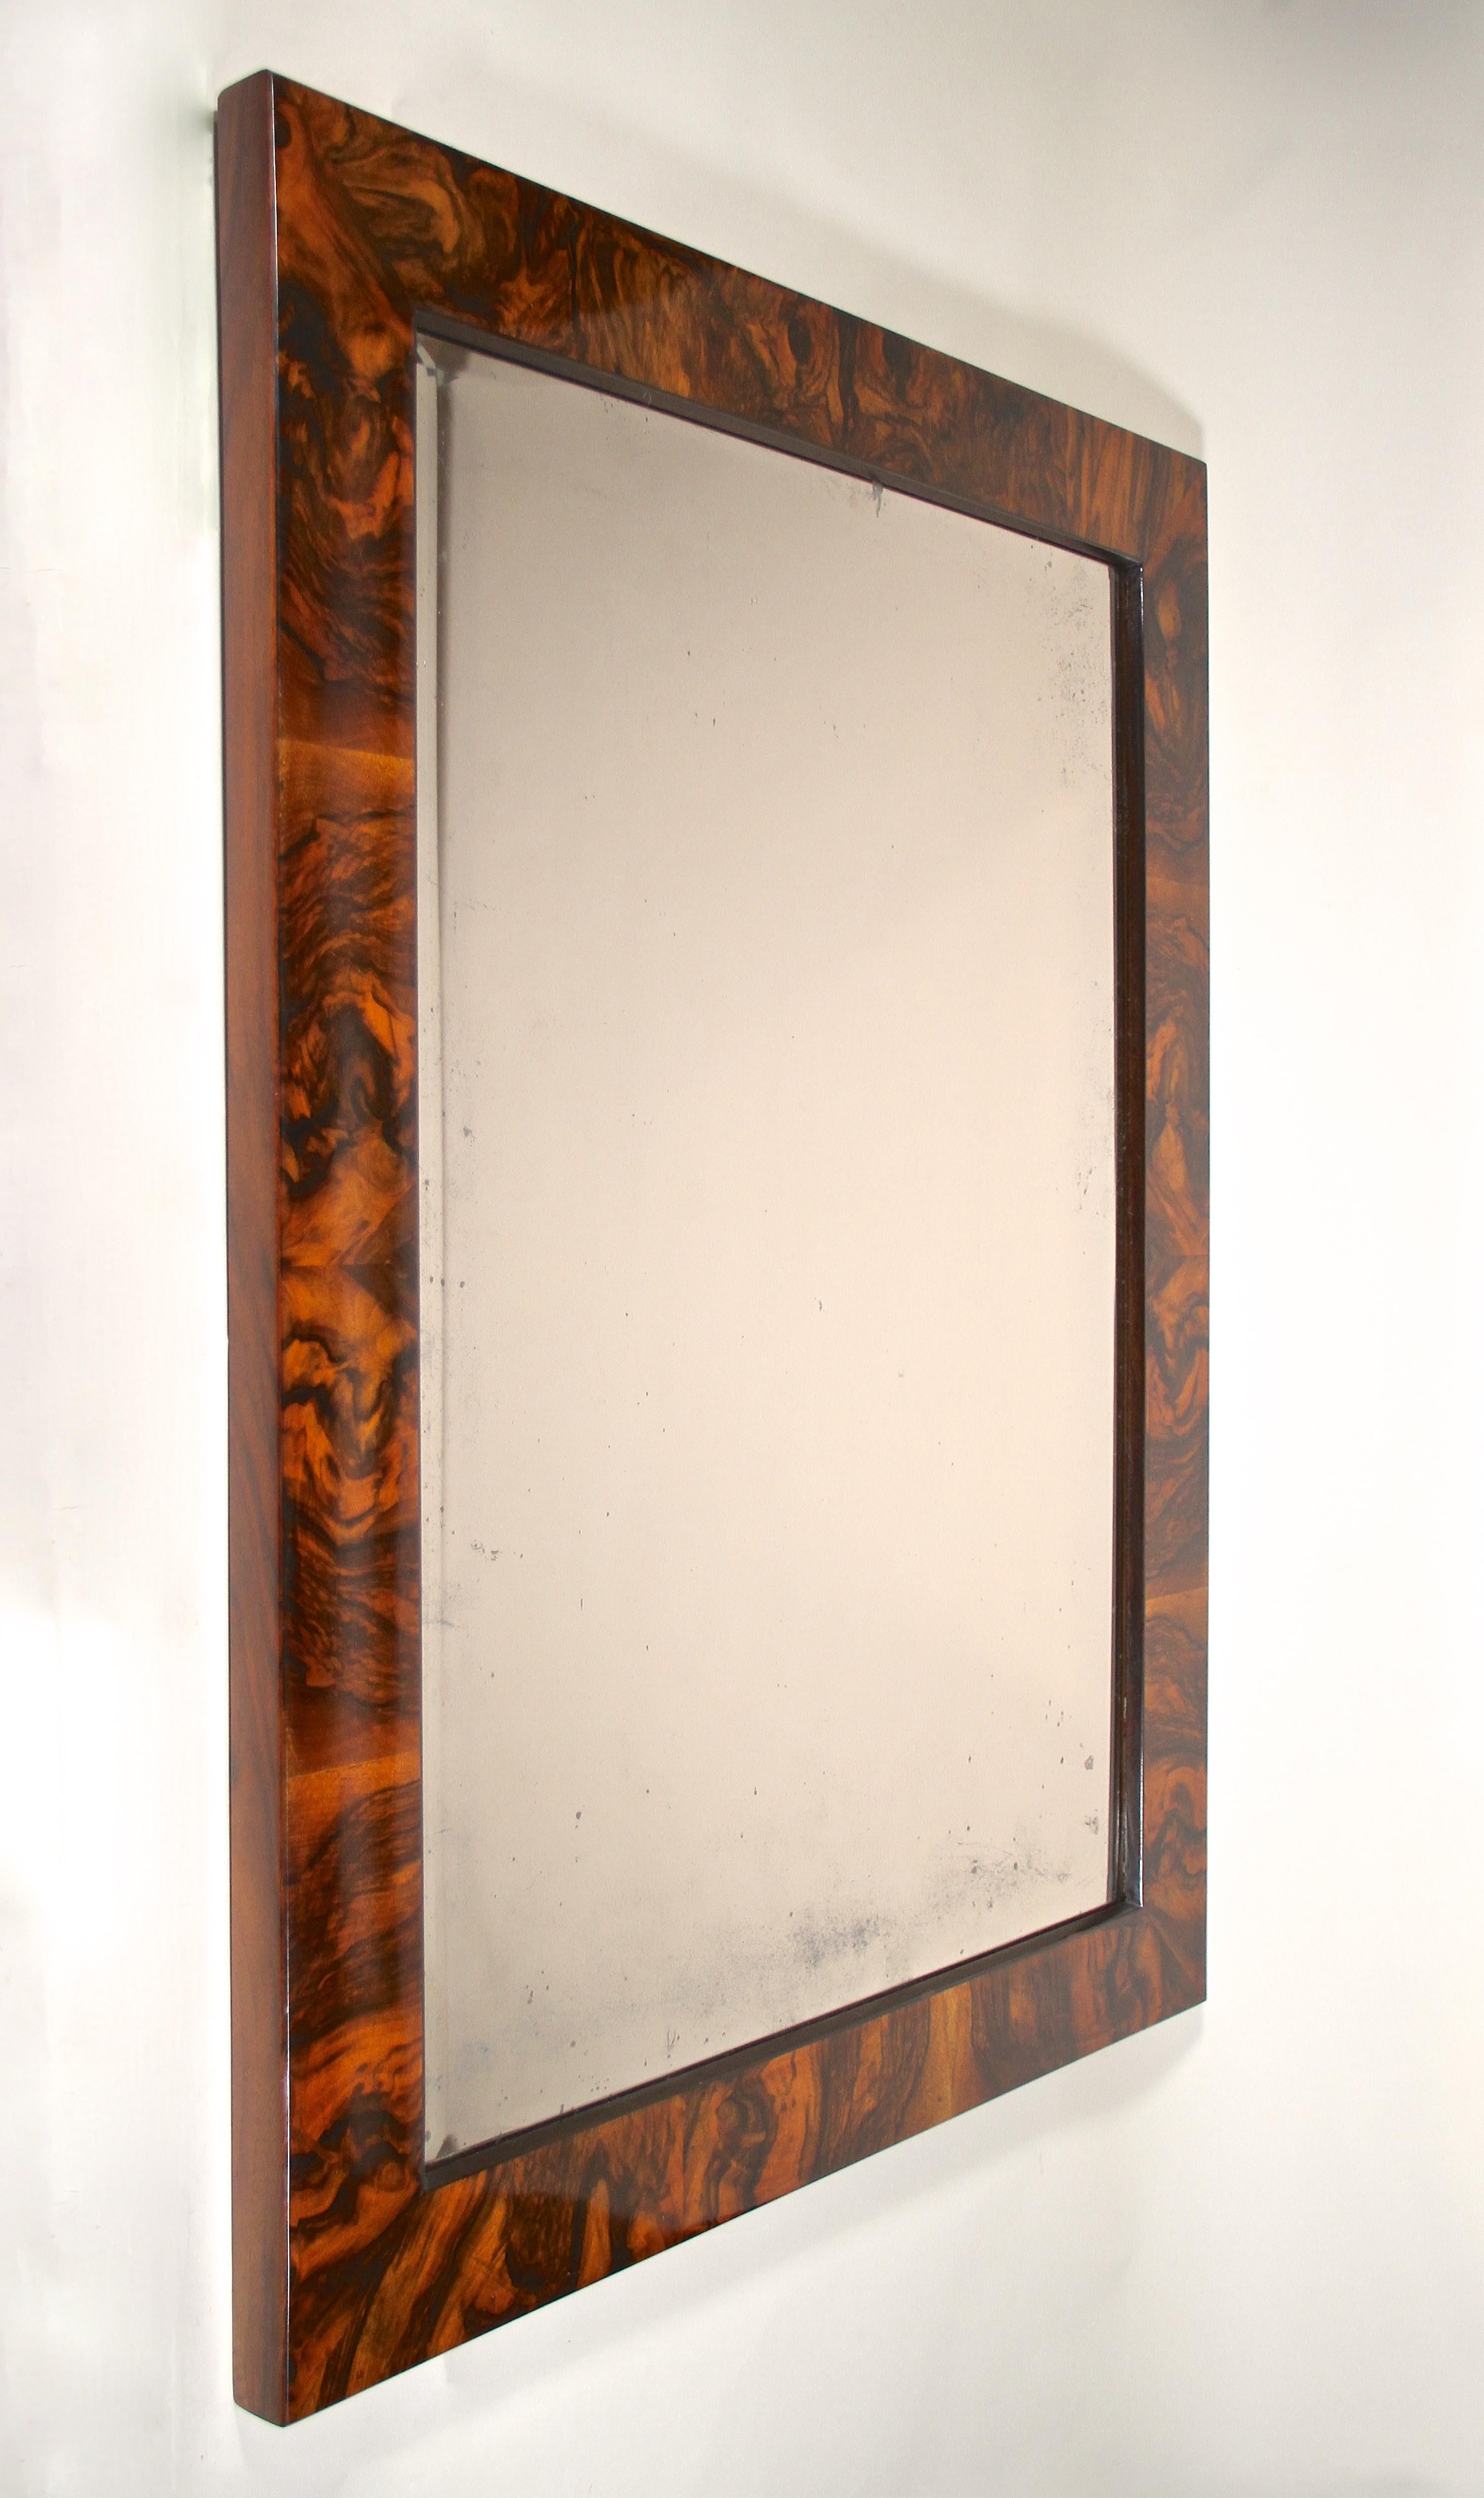 Magnificent 19th century burr walnut wall mirror from the famous Biedermeier era in Vienna/ Austria around 1820. This amazing wall mirror from the early period comes with a traditional overlapped substructure made of spruce wood and impresses with a